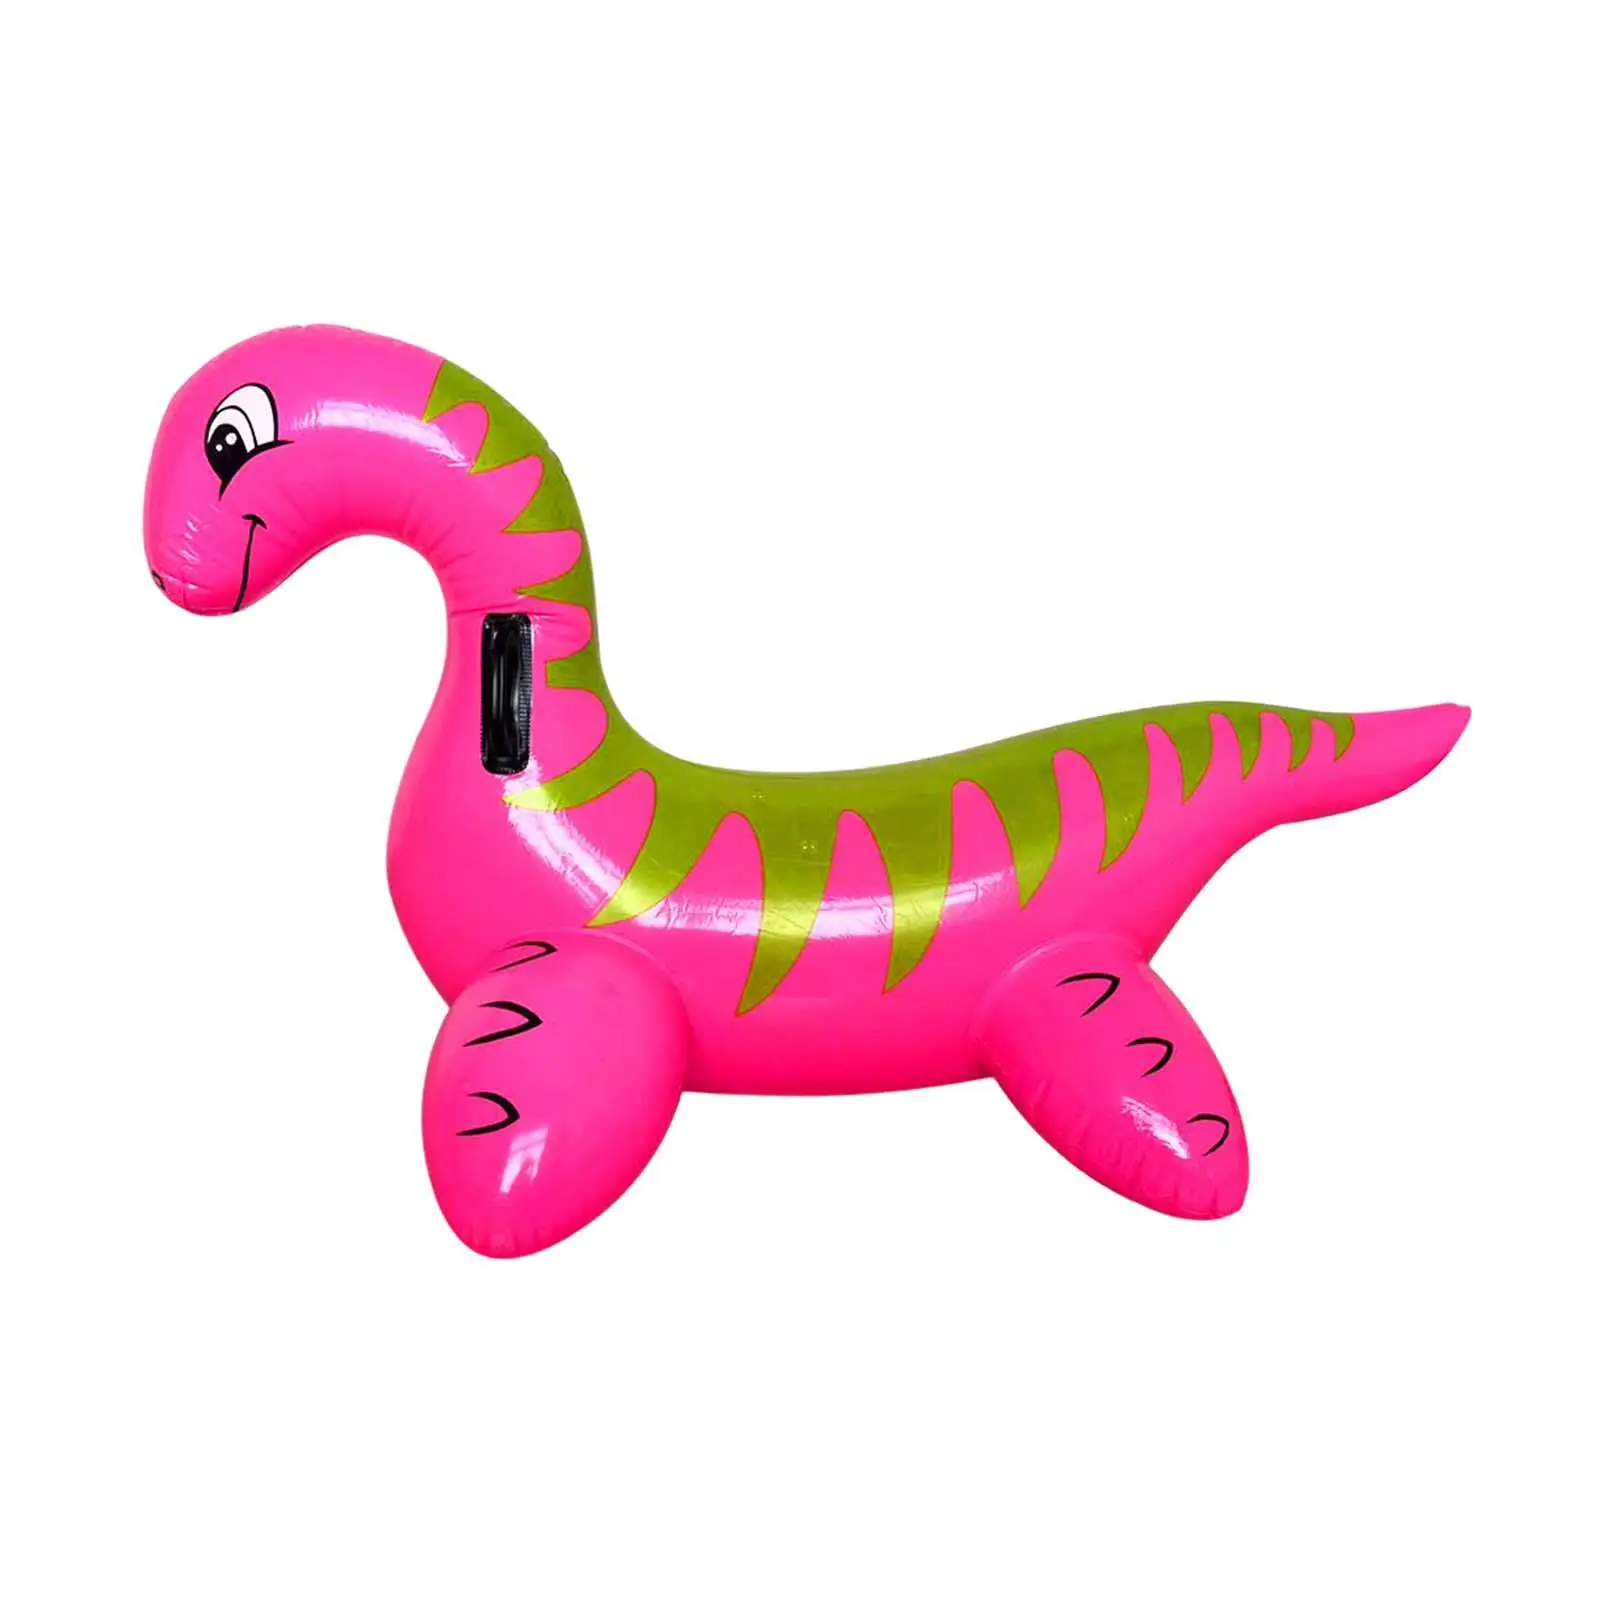 Dinosaur Pool Floats Inflatable Pool Toys for Swimming Party Supplies Beach